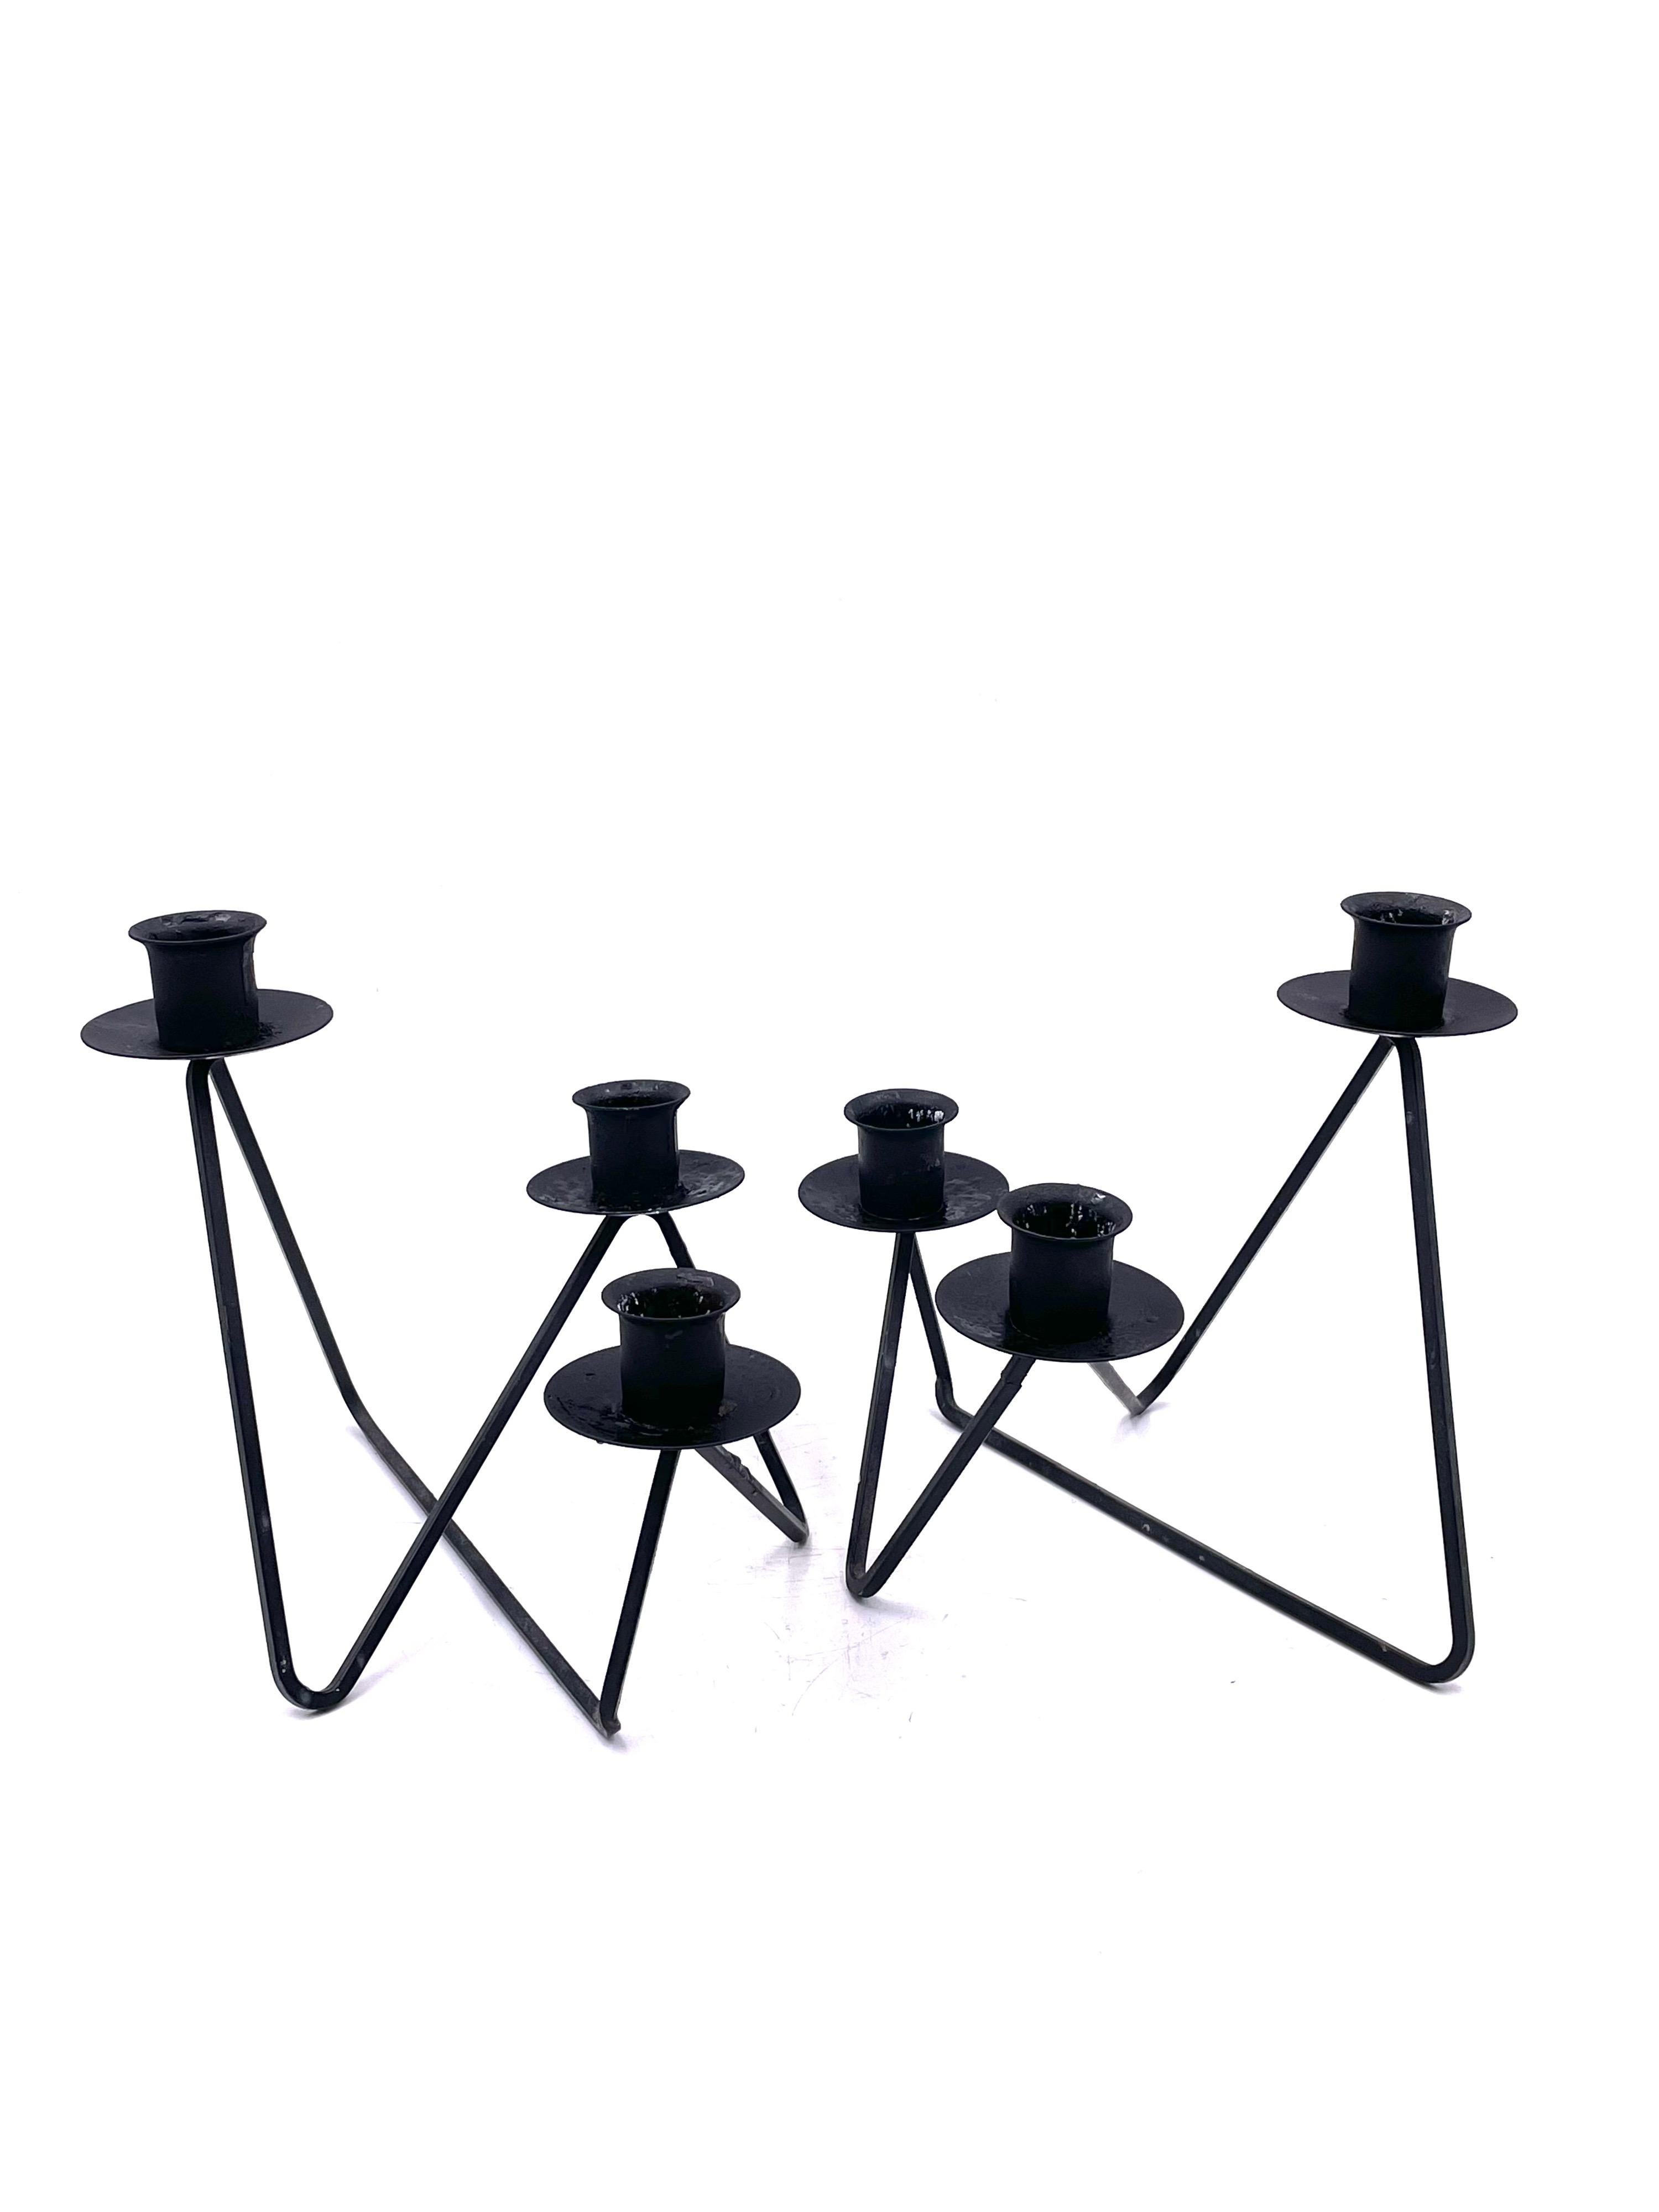 Mid-Century Modern American Mid Century Modern Atomic Age Pair of Candleholders Set For Sale